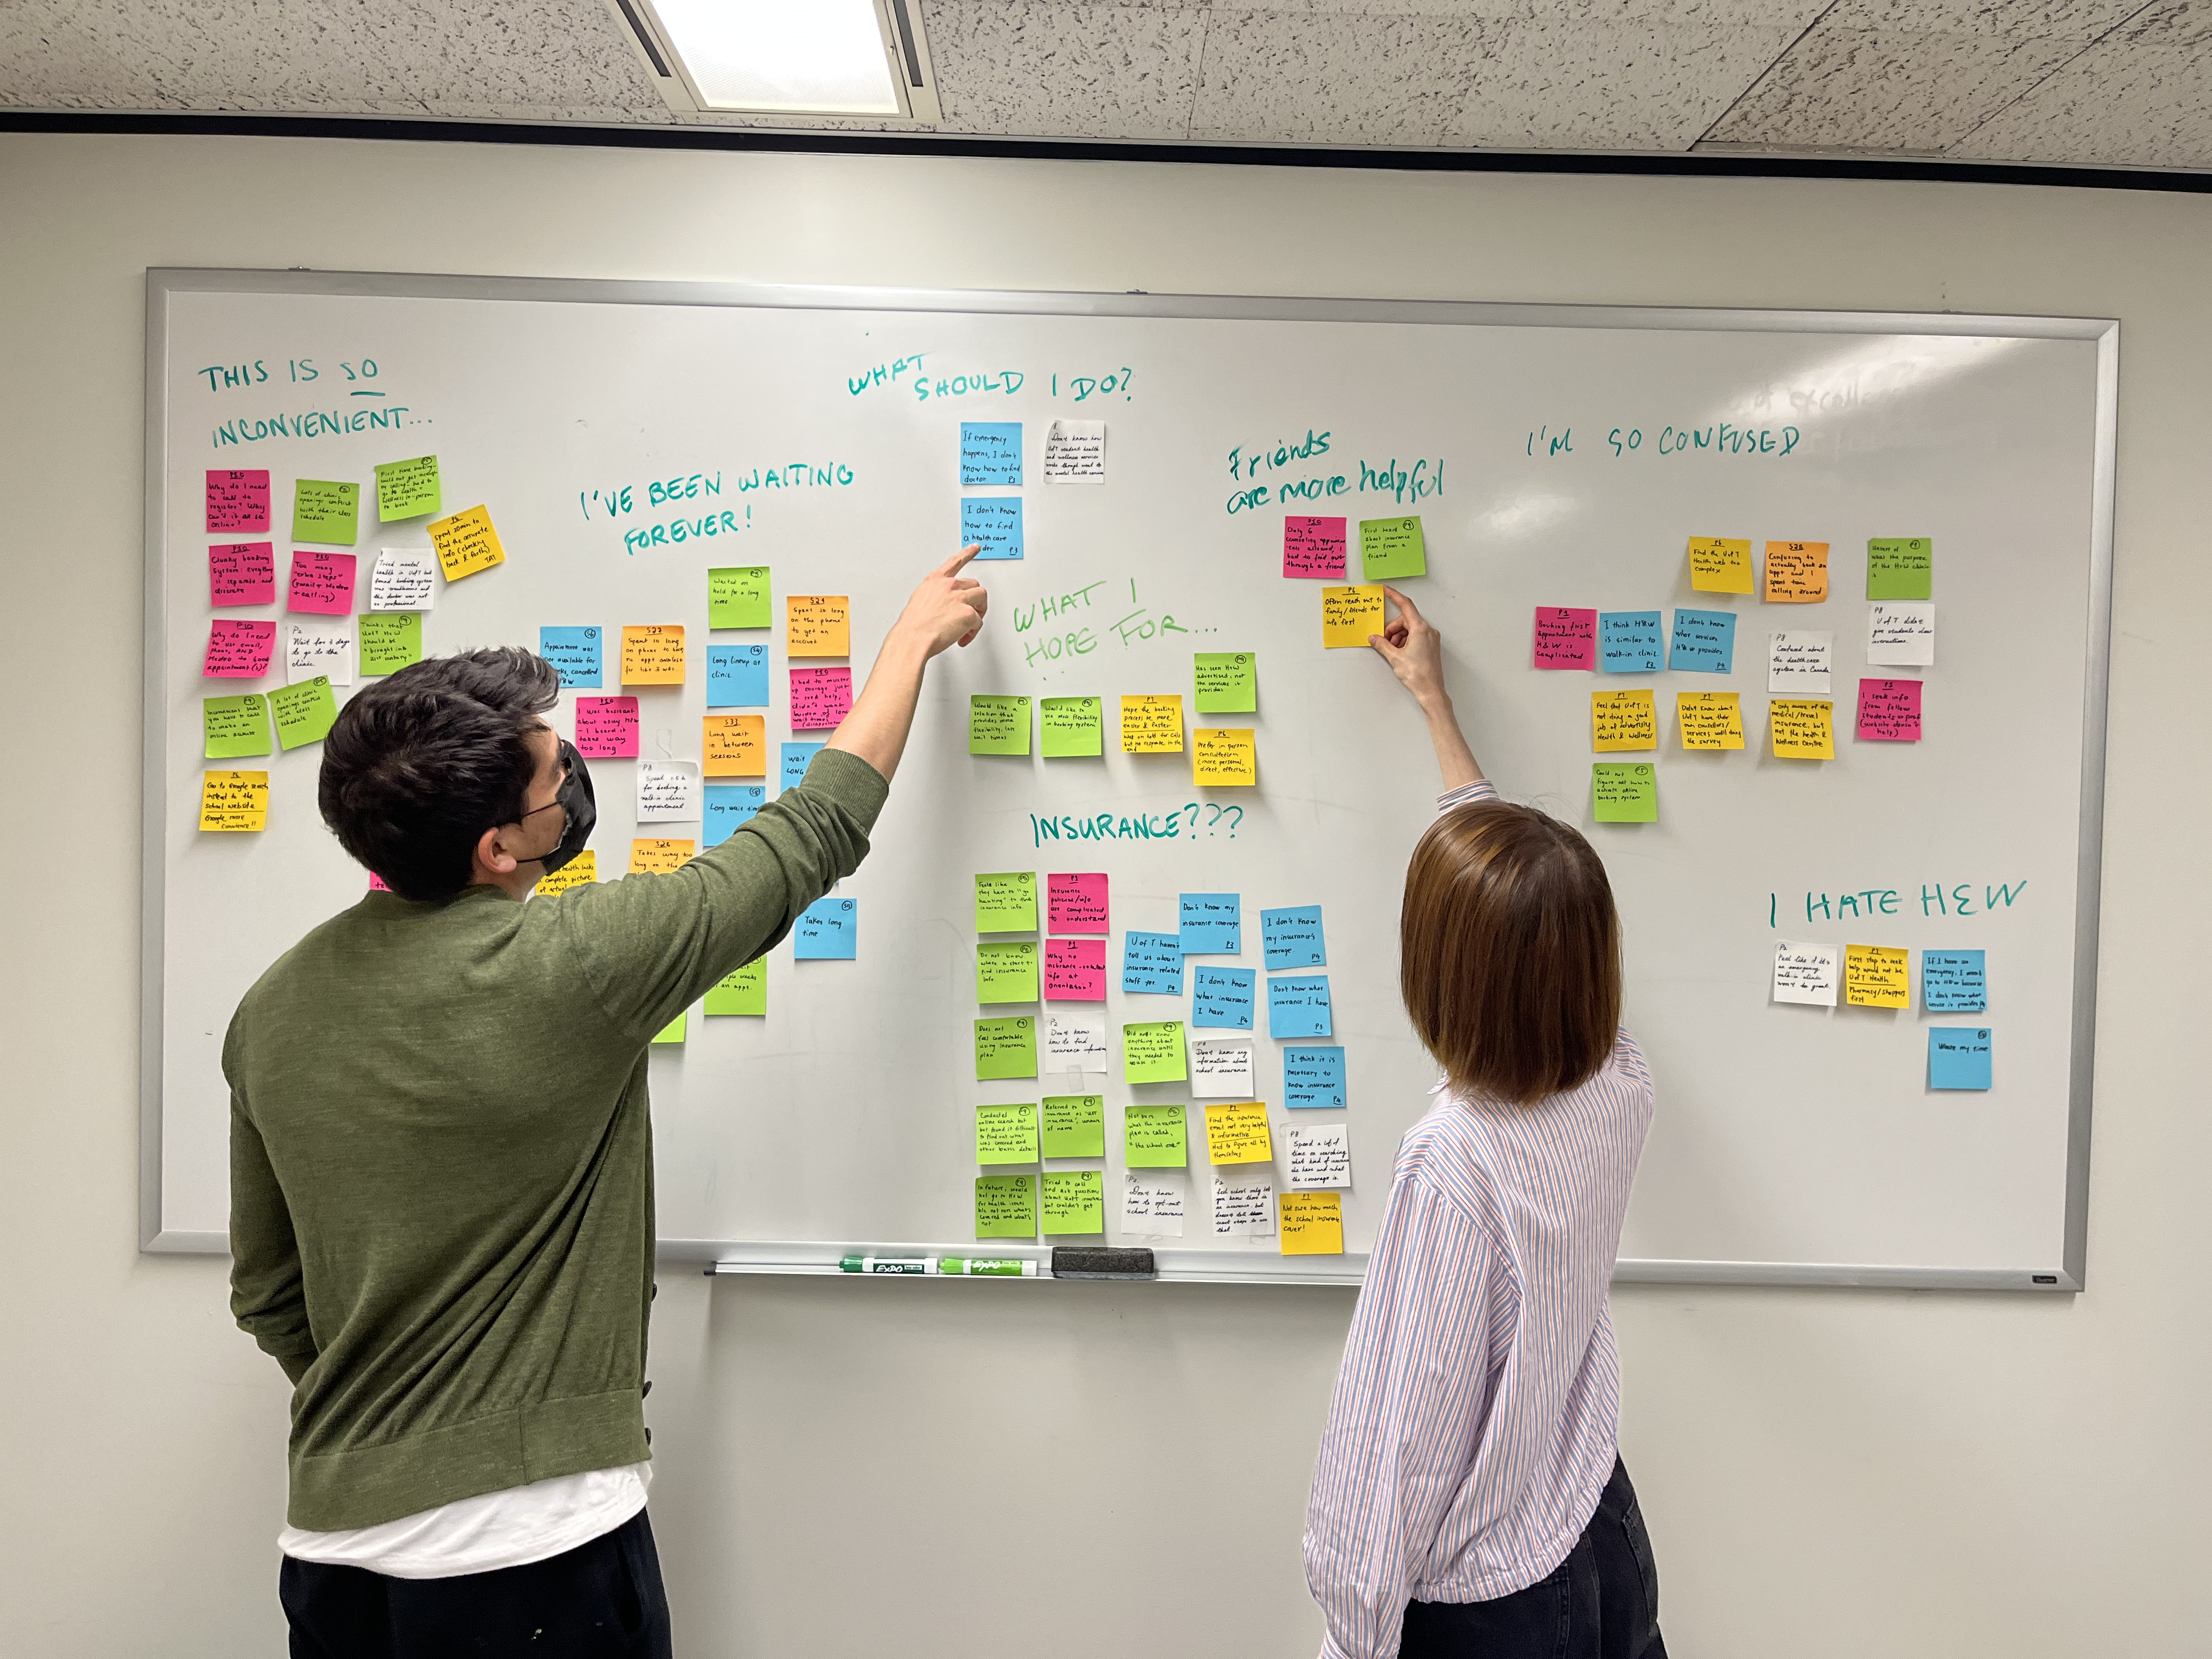 My teammate and me placing sticky notes on a whiteboard as part of affinity diagramming